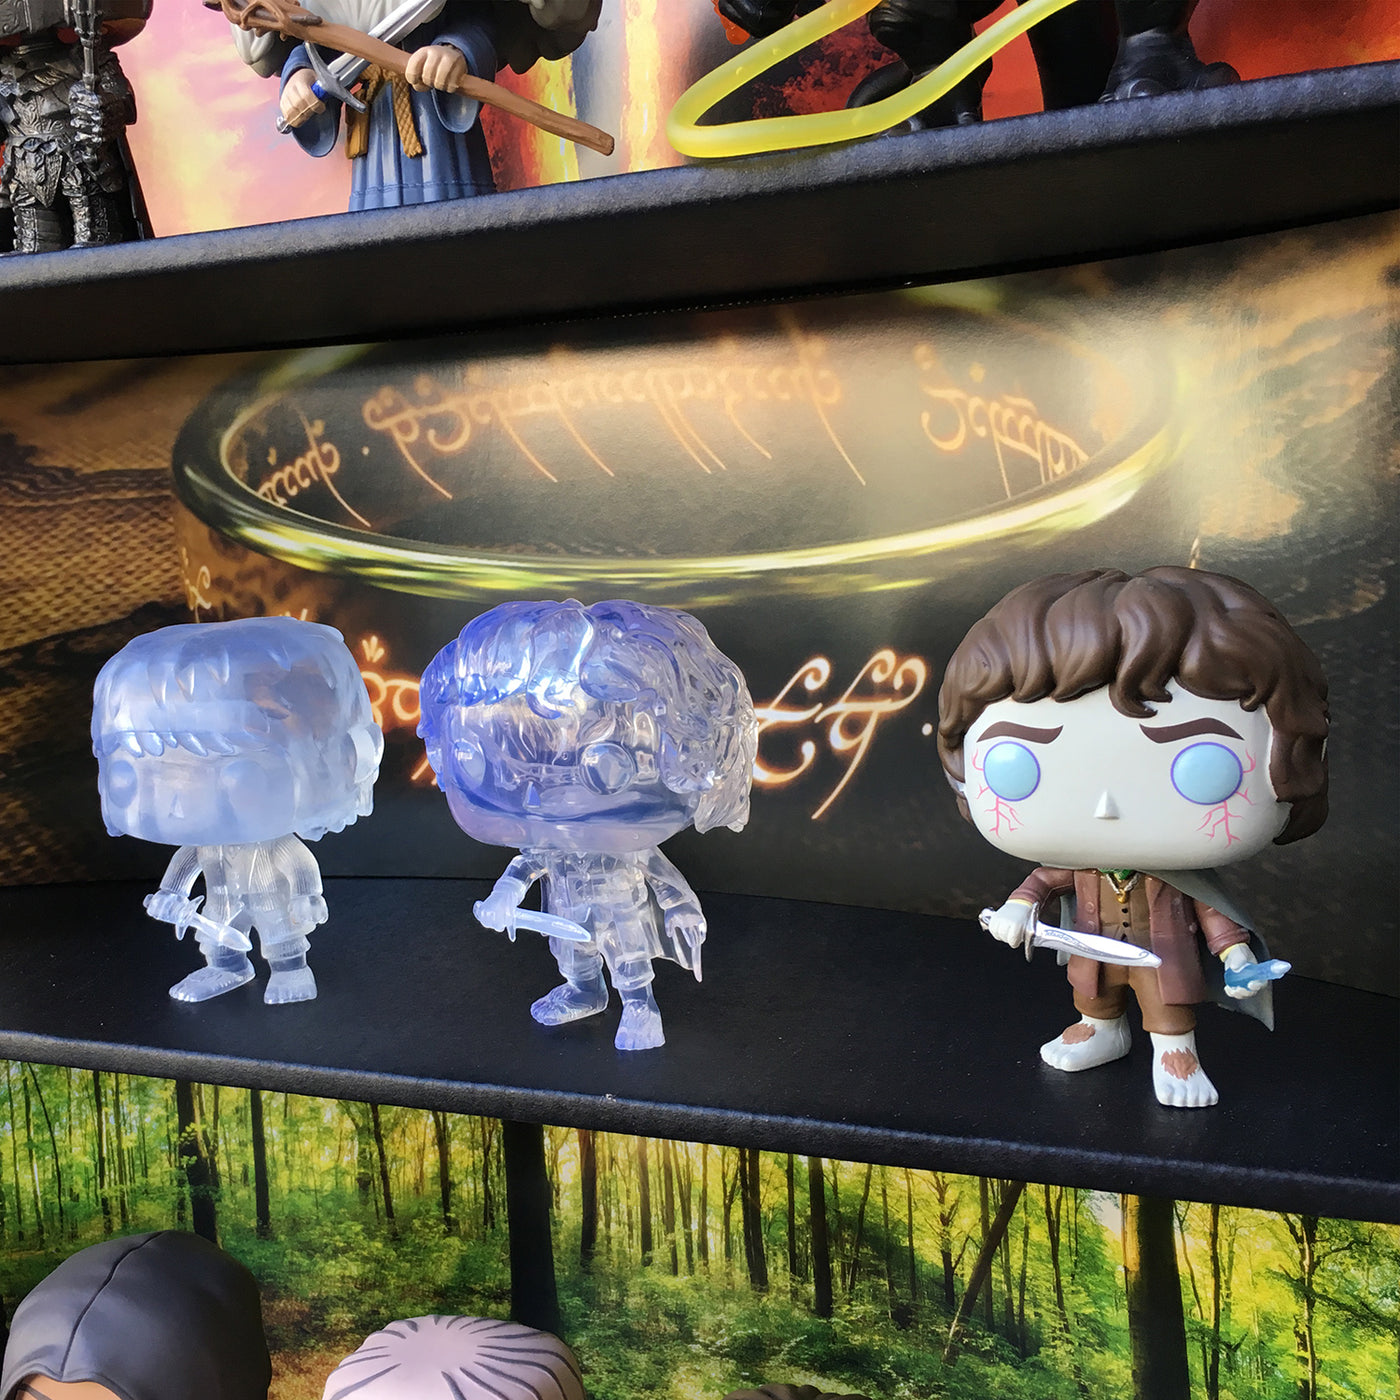 **BACK IN STOCK MAY 13TH** LORD OF THE RINGS - Display Case for Funko Pops with 3 Backdrop Inserts, Corrugated Cardboard - Display Geek